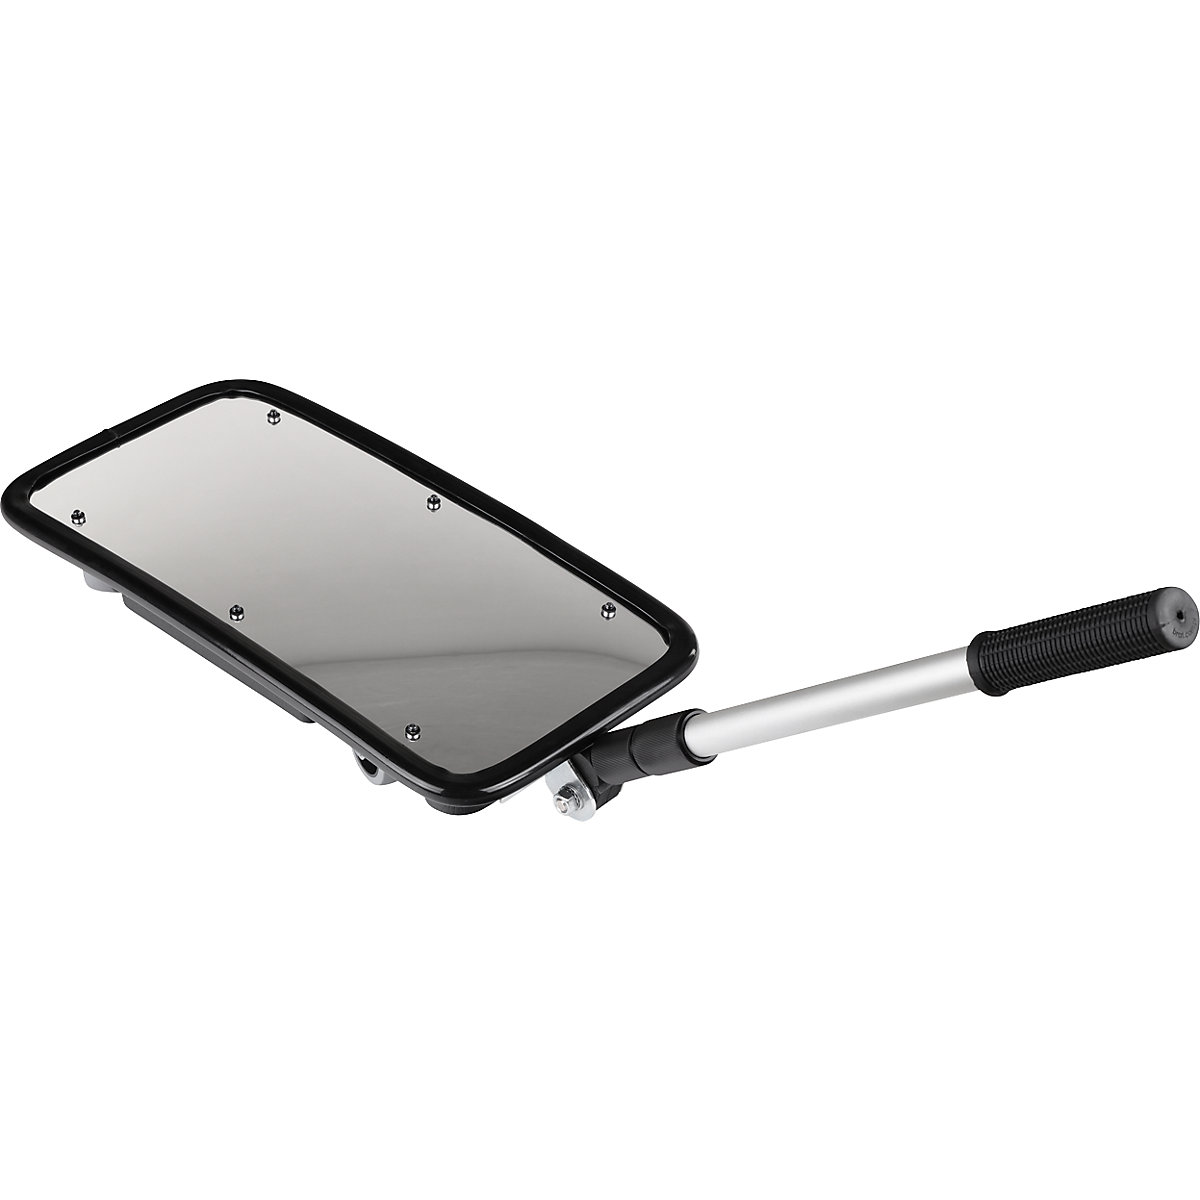 Inspection mirror with telescopic arm, rectangular, with castors, HxWxD 200 x 400 x 80 mm, with light-8